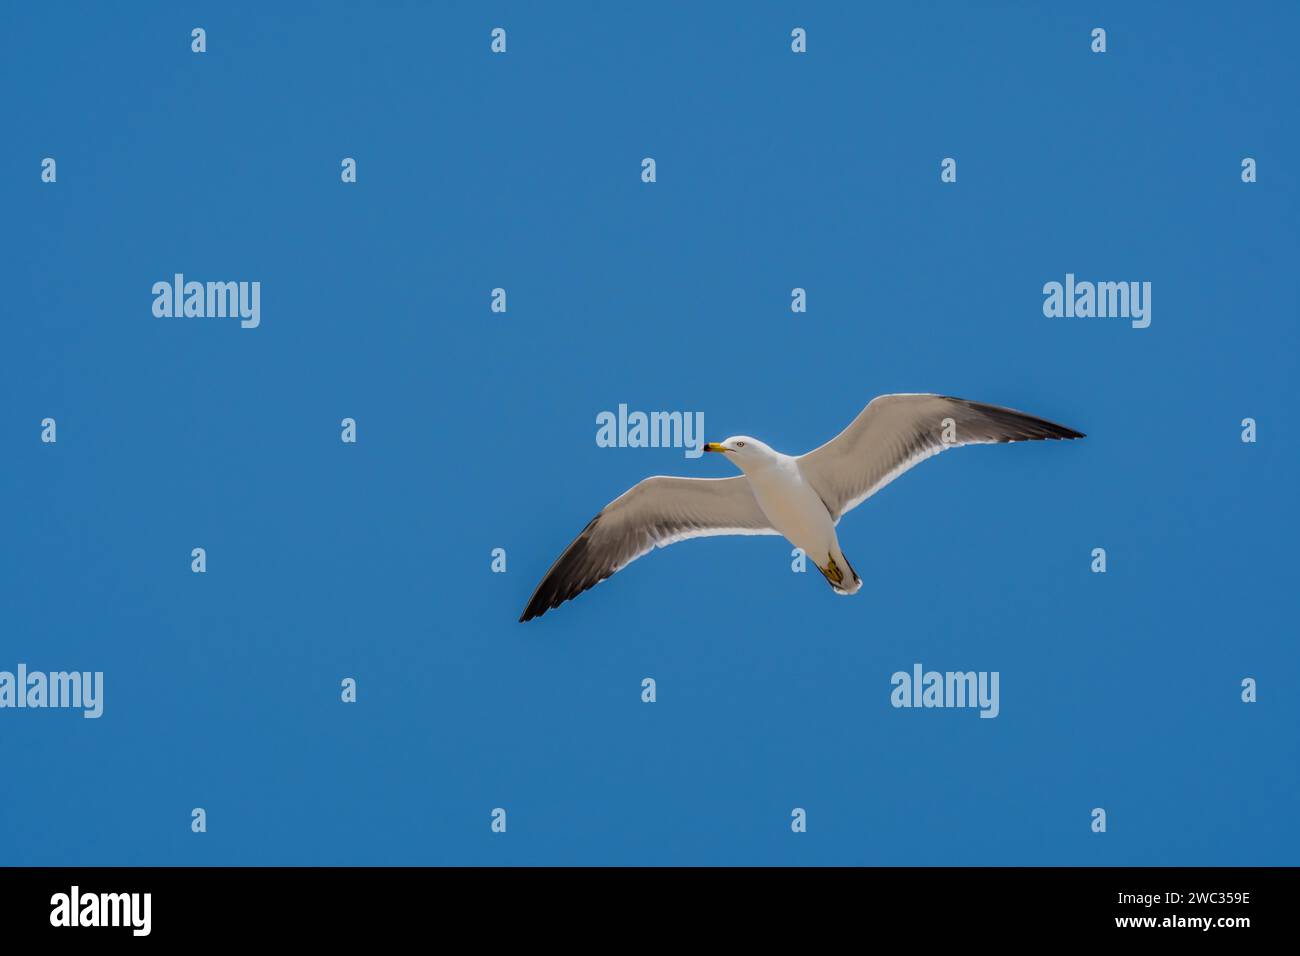 Seagull flying high above in beautiful blue sky Stock Photo